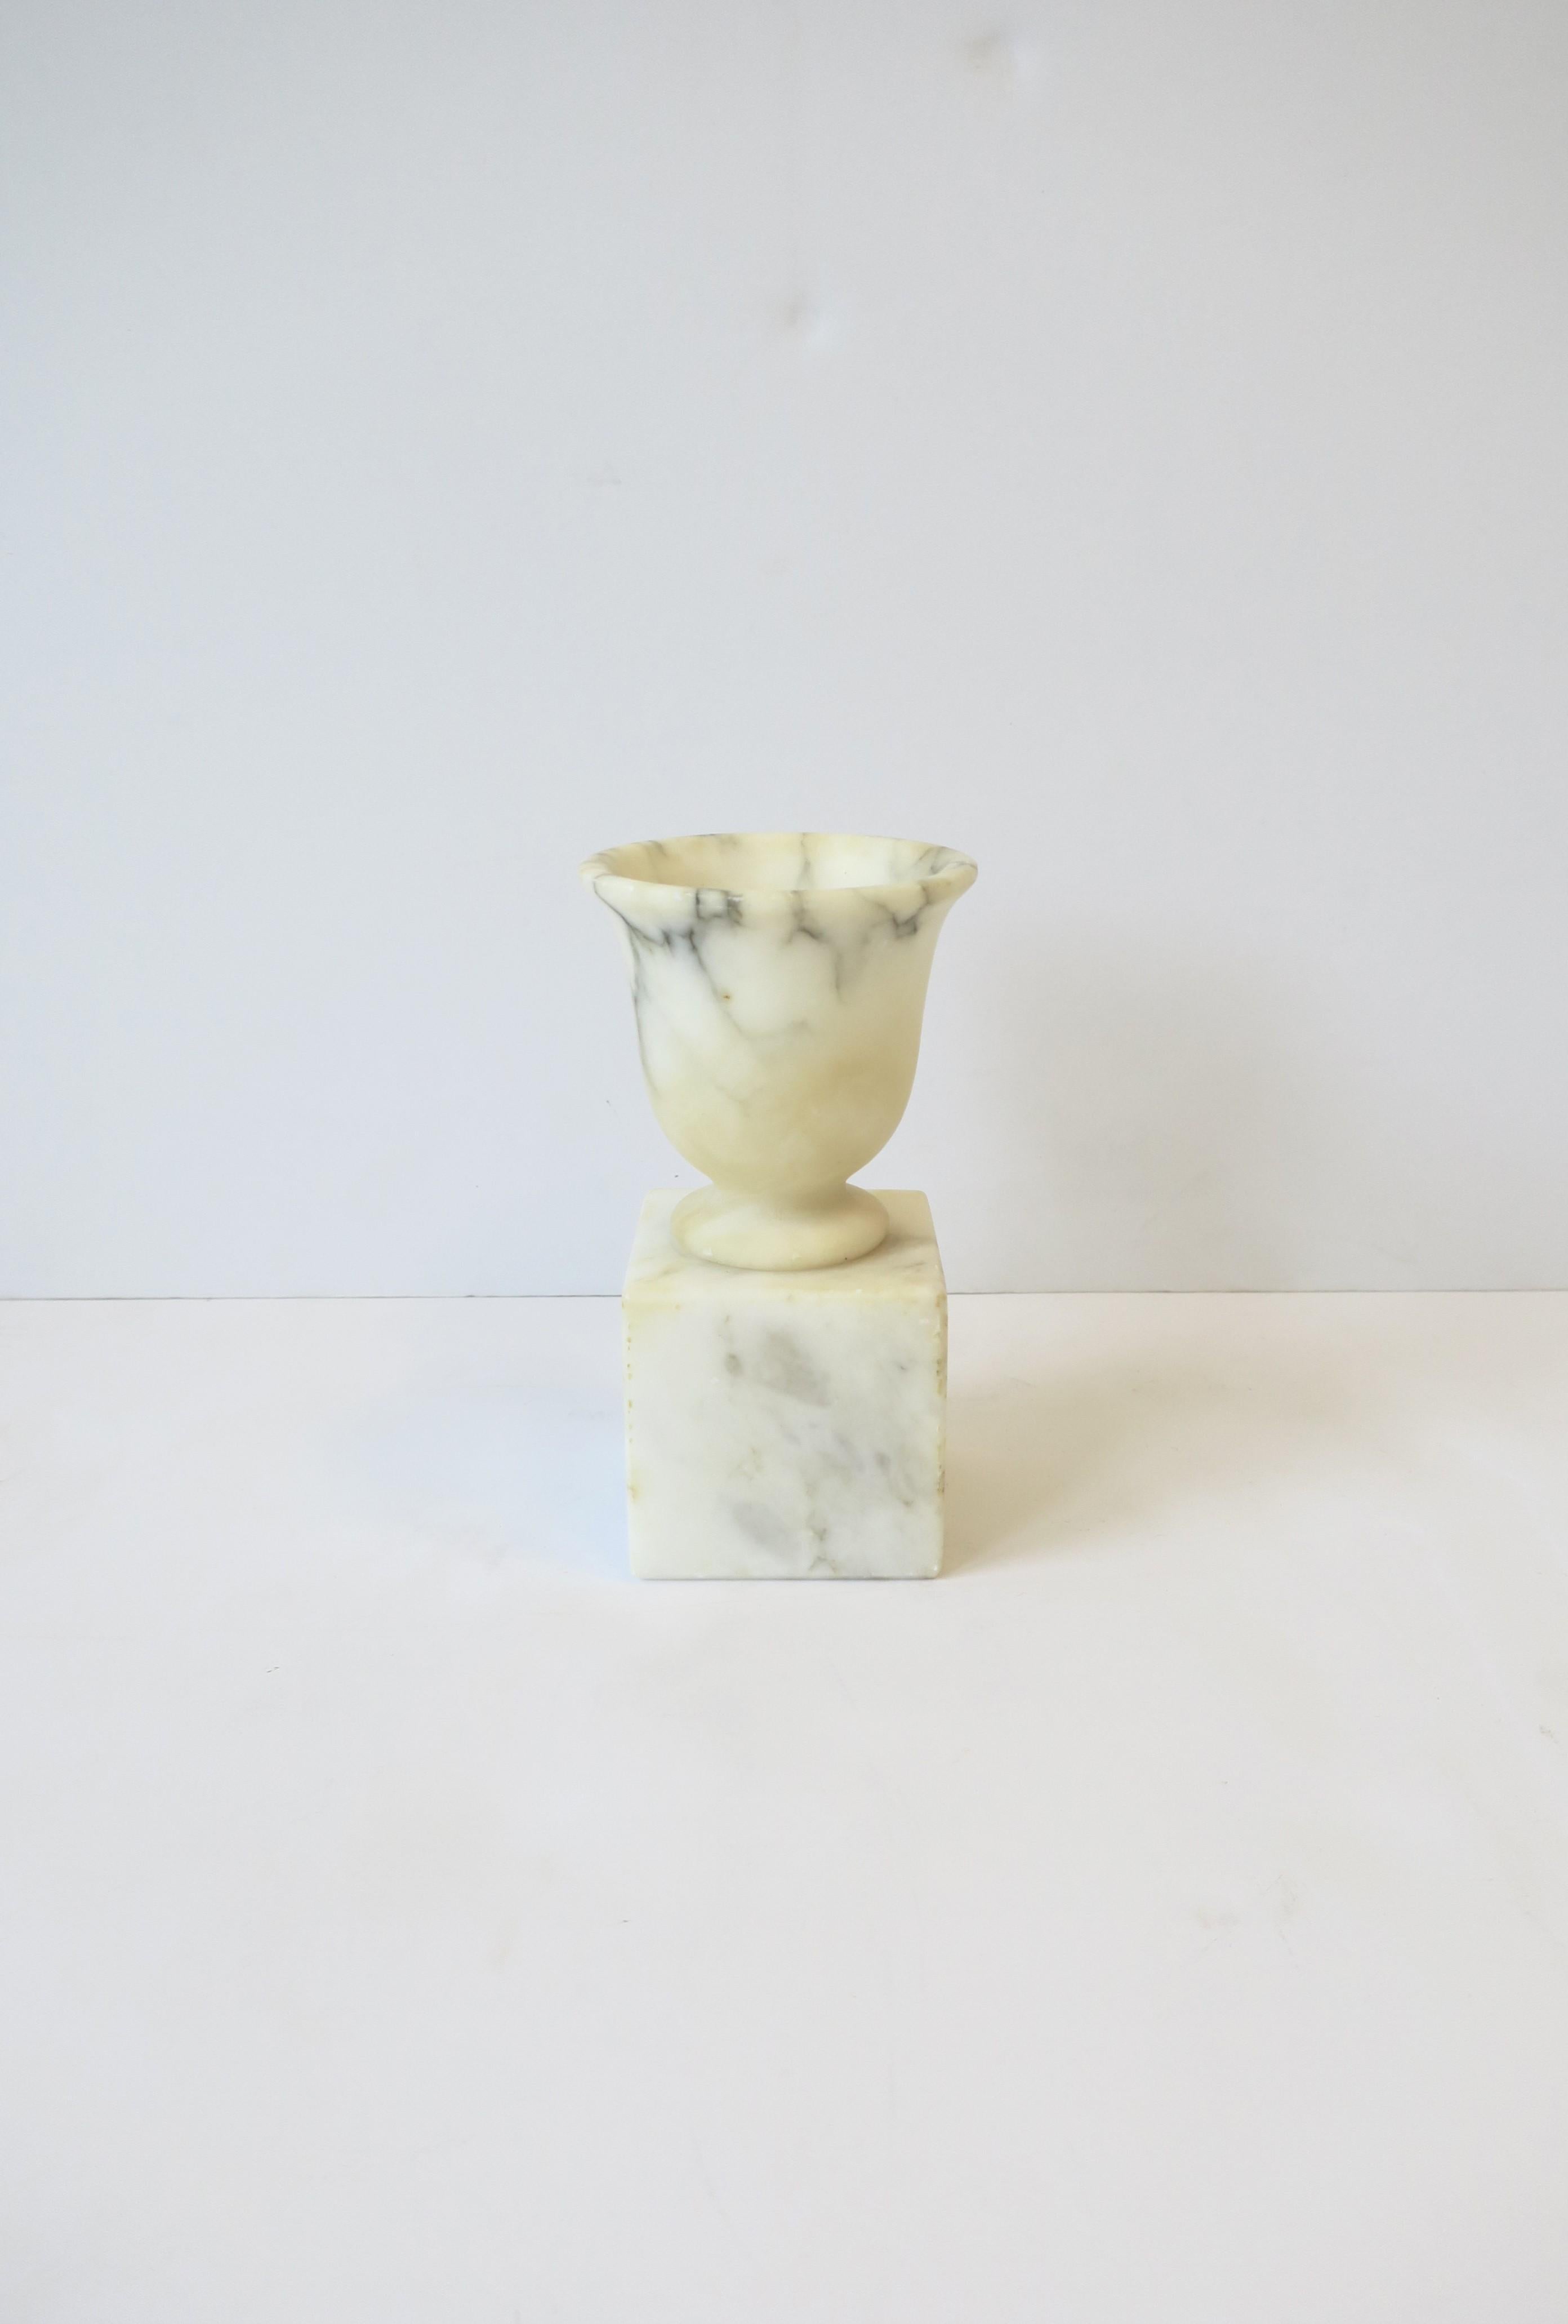 An Italian alabaster marble urn on pedestal base in the Neoclassical style, circa early to mid-20th century, Italy. 
This decorative object is made from one piece of alabaster marble. Beautiful as a standalone piece or blended with other items (as